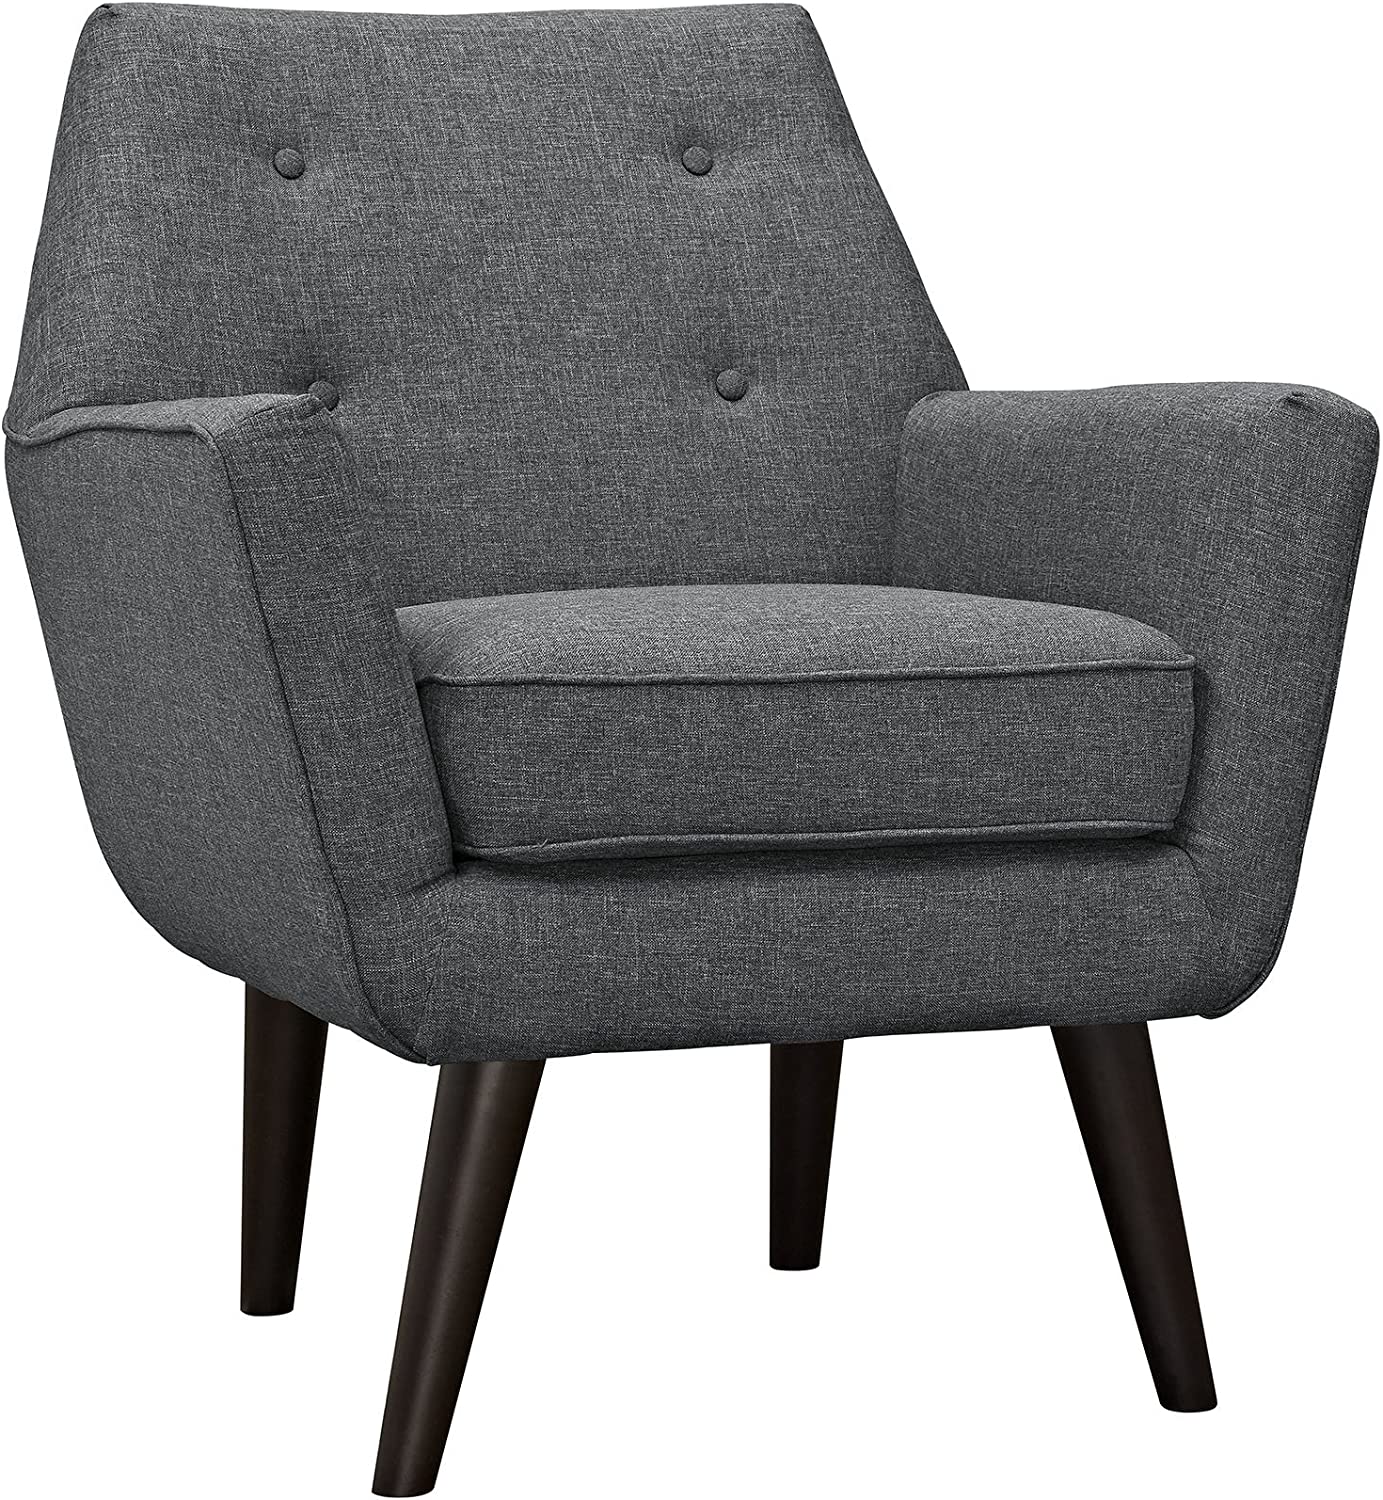 Modway Posit Mid-Century Modern Fabric Upholstered Accent Lounge Arm Chair In Wheatgrass